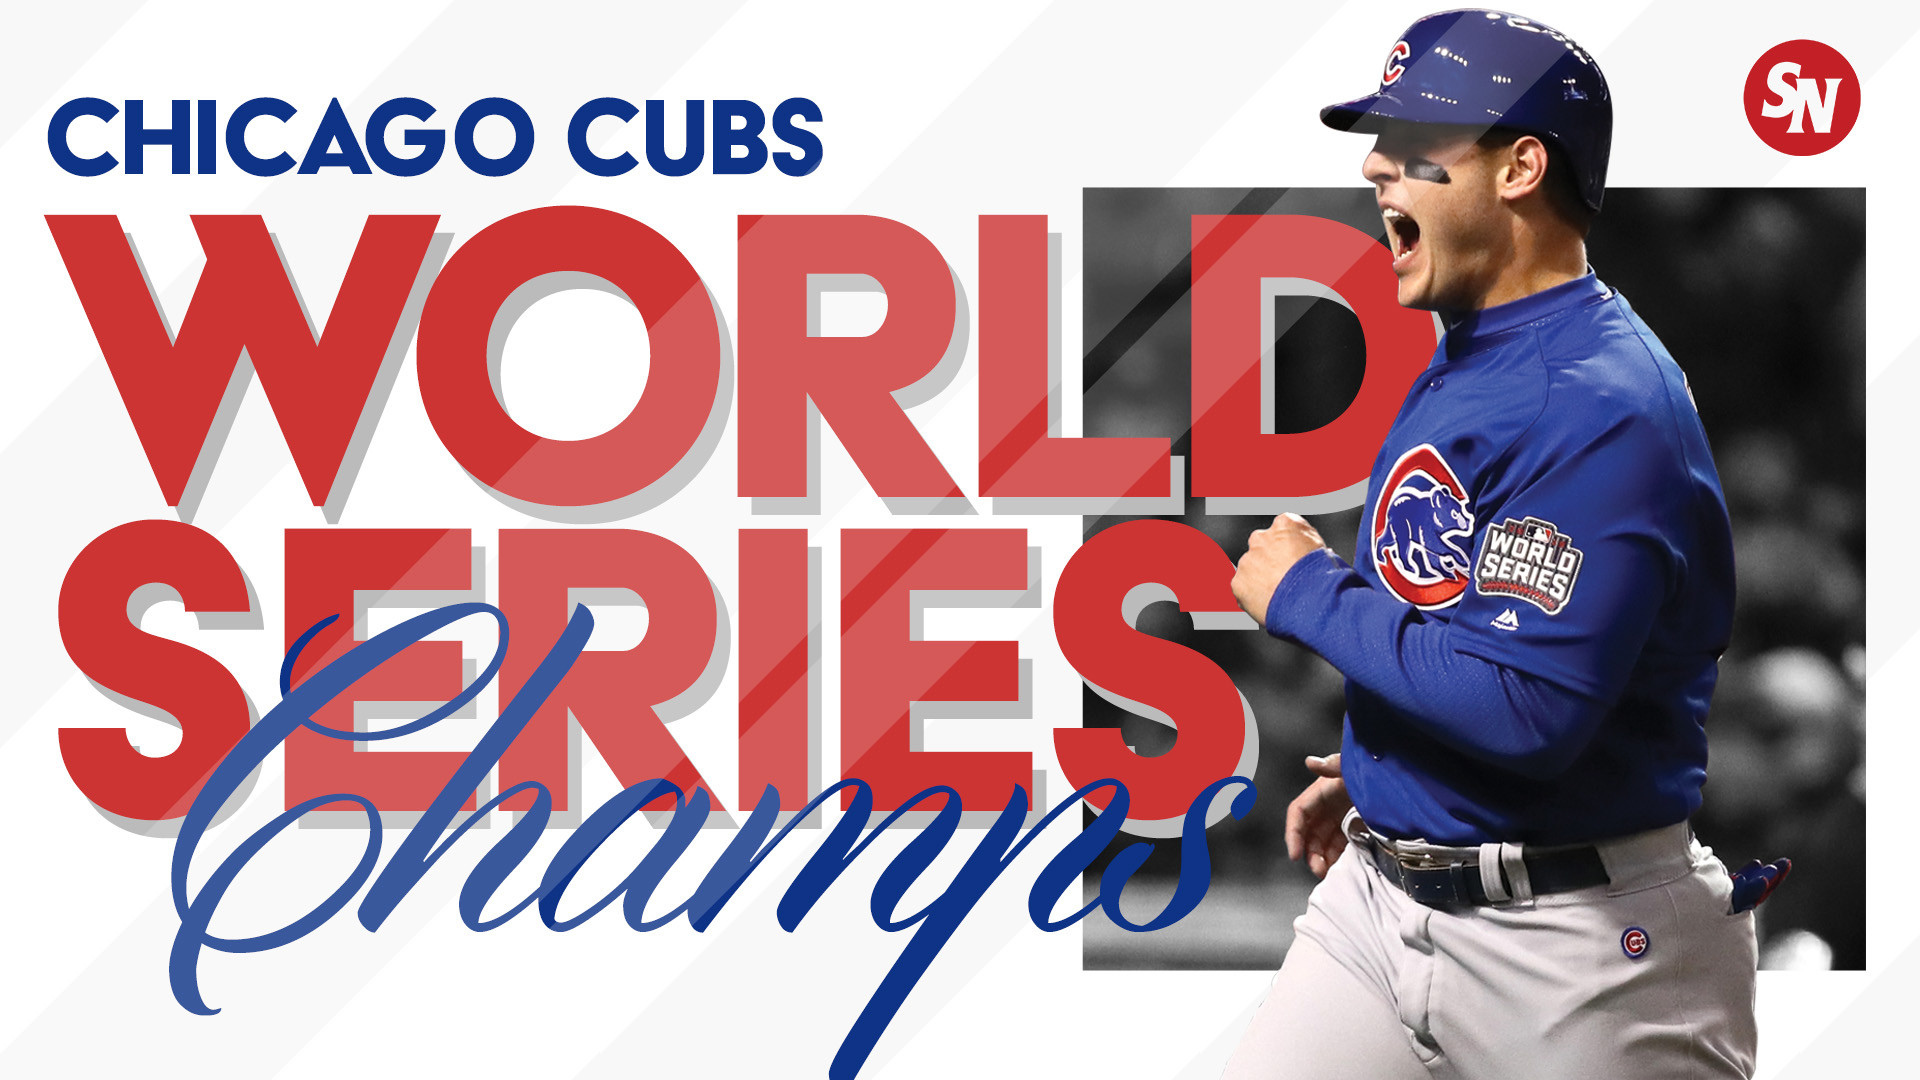 1920x1080 Cubs win World Series for first time in 108 years | MLB | Sporting News